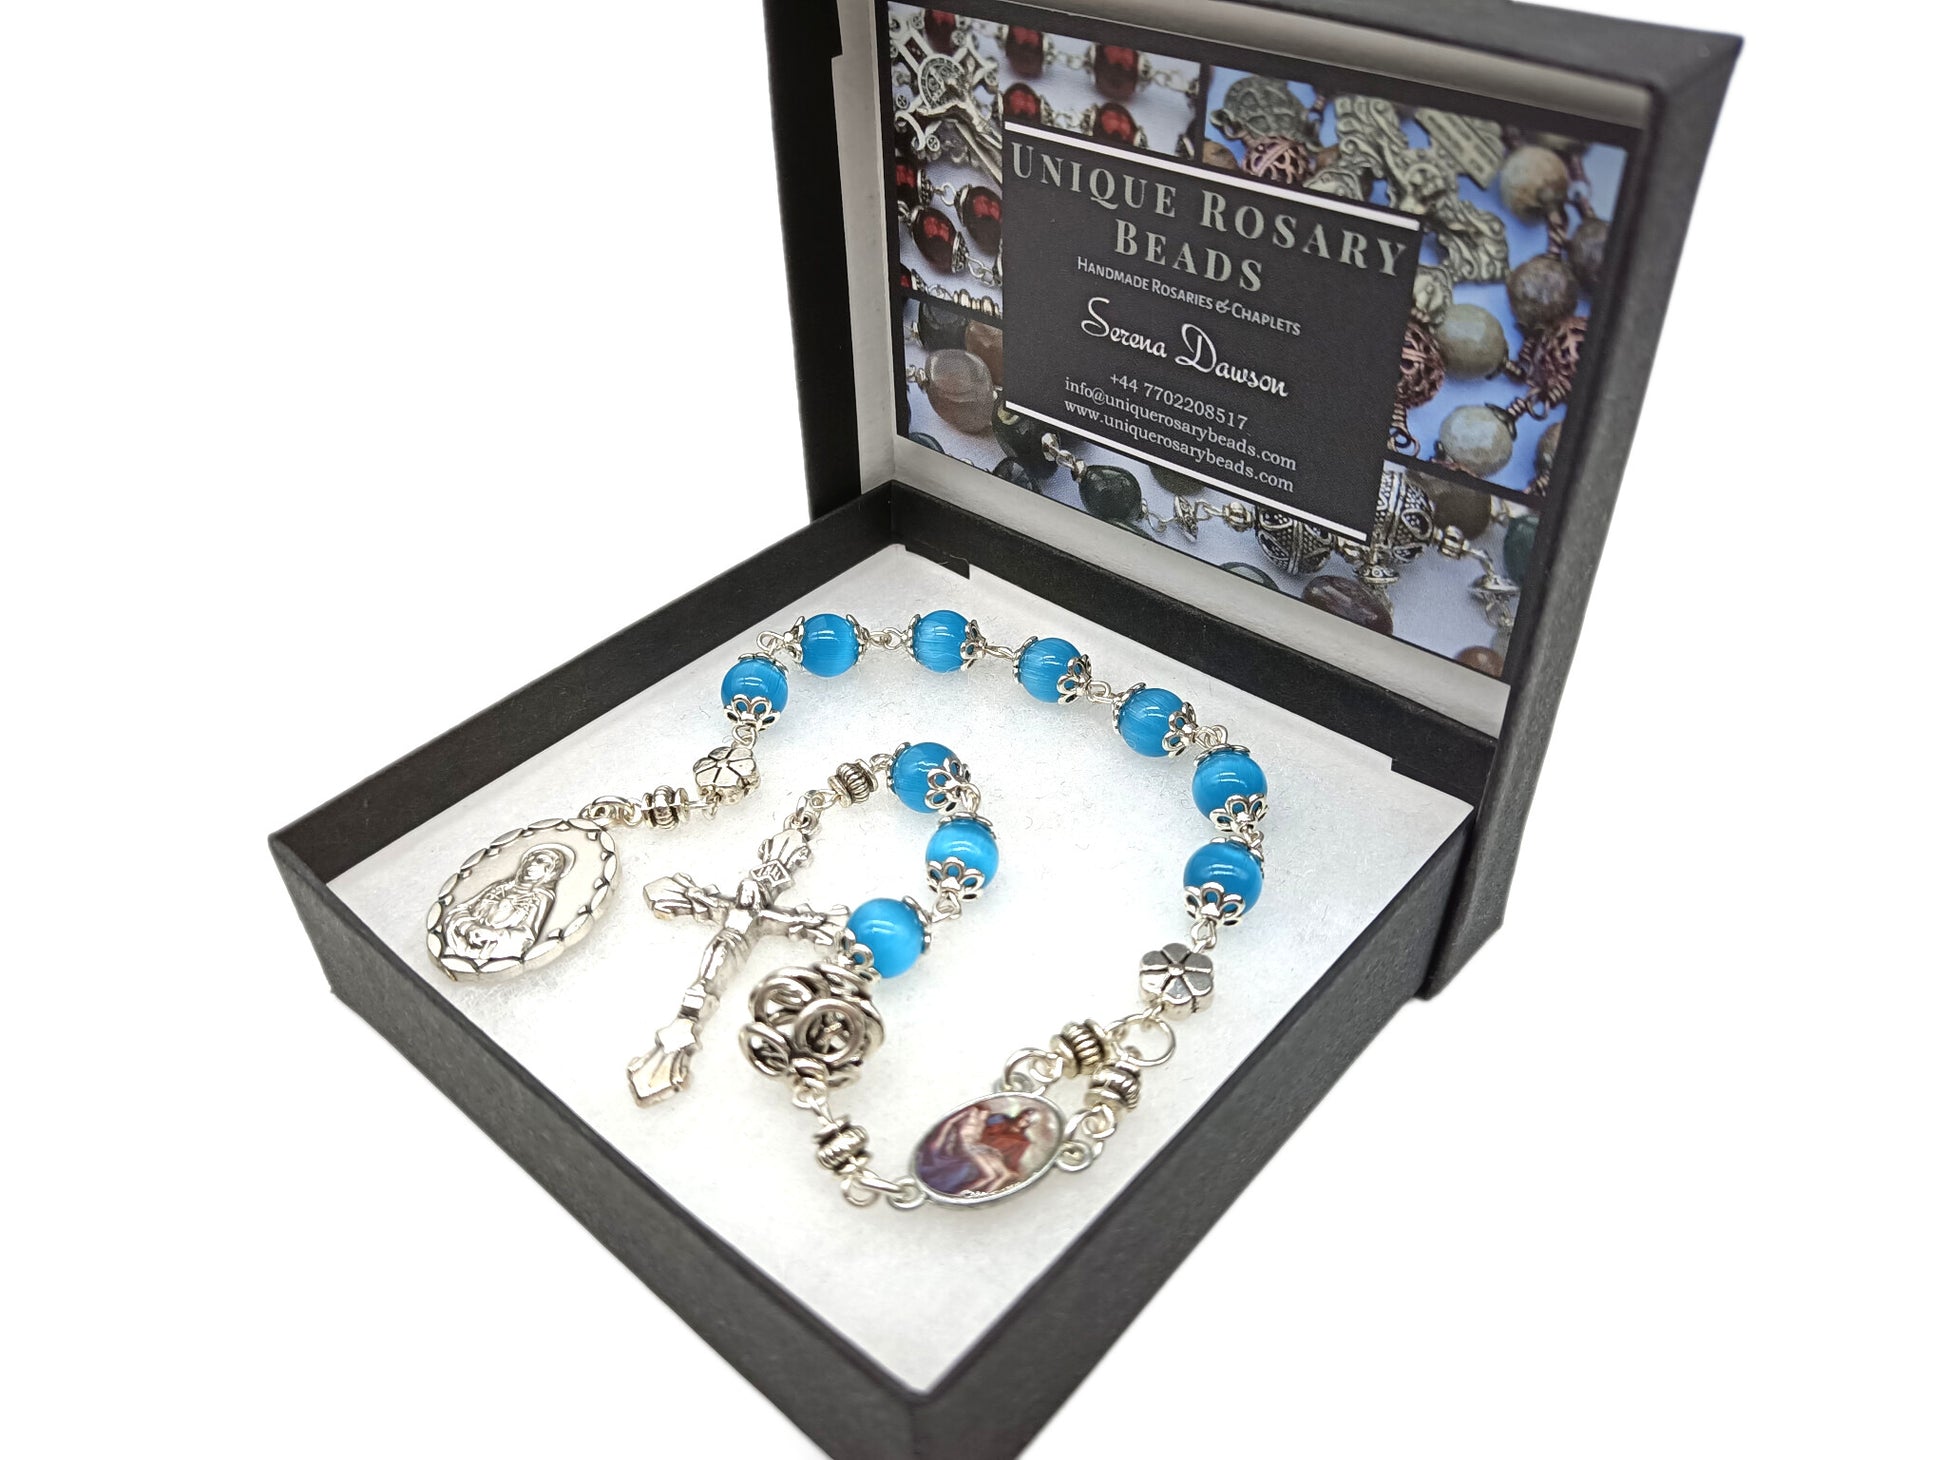 Pocket servite unique dolor rosary beads with blue glass beads and silver crucifix, medals and dolour bead.